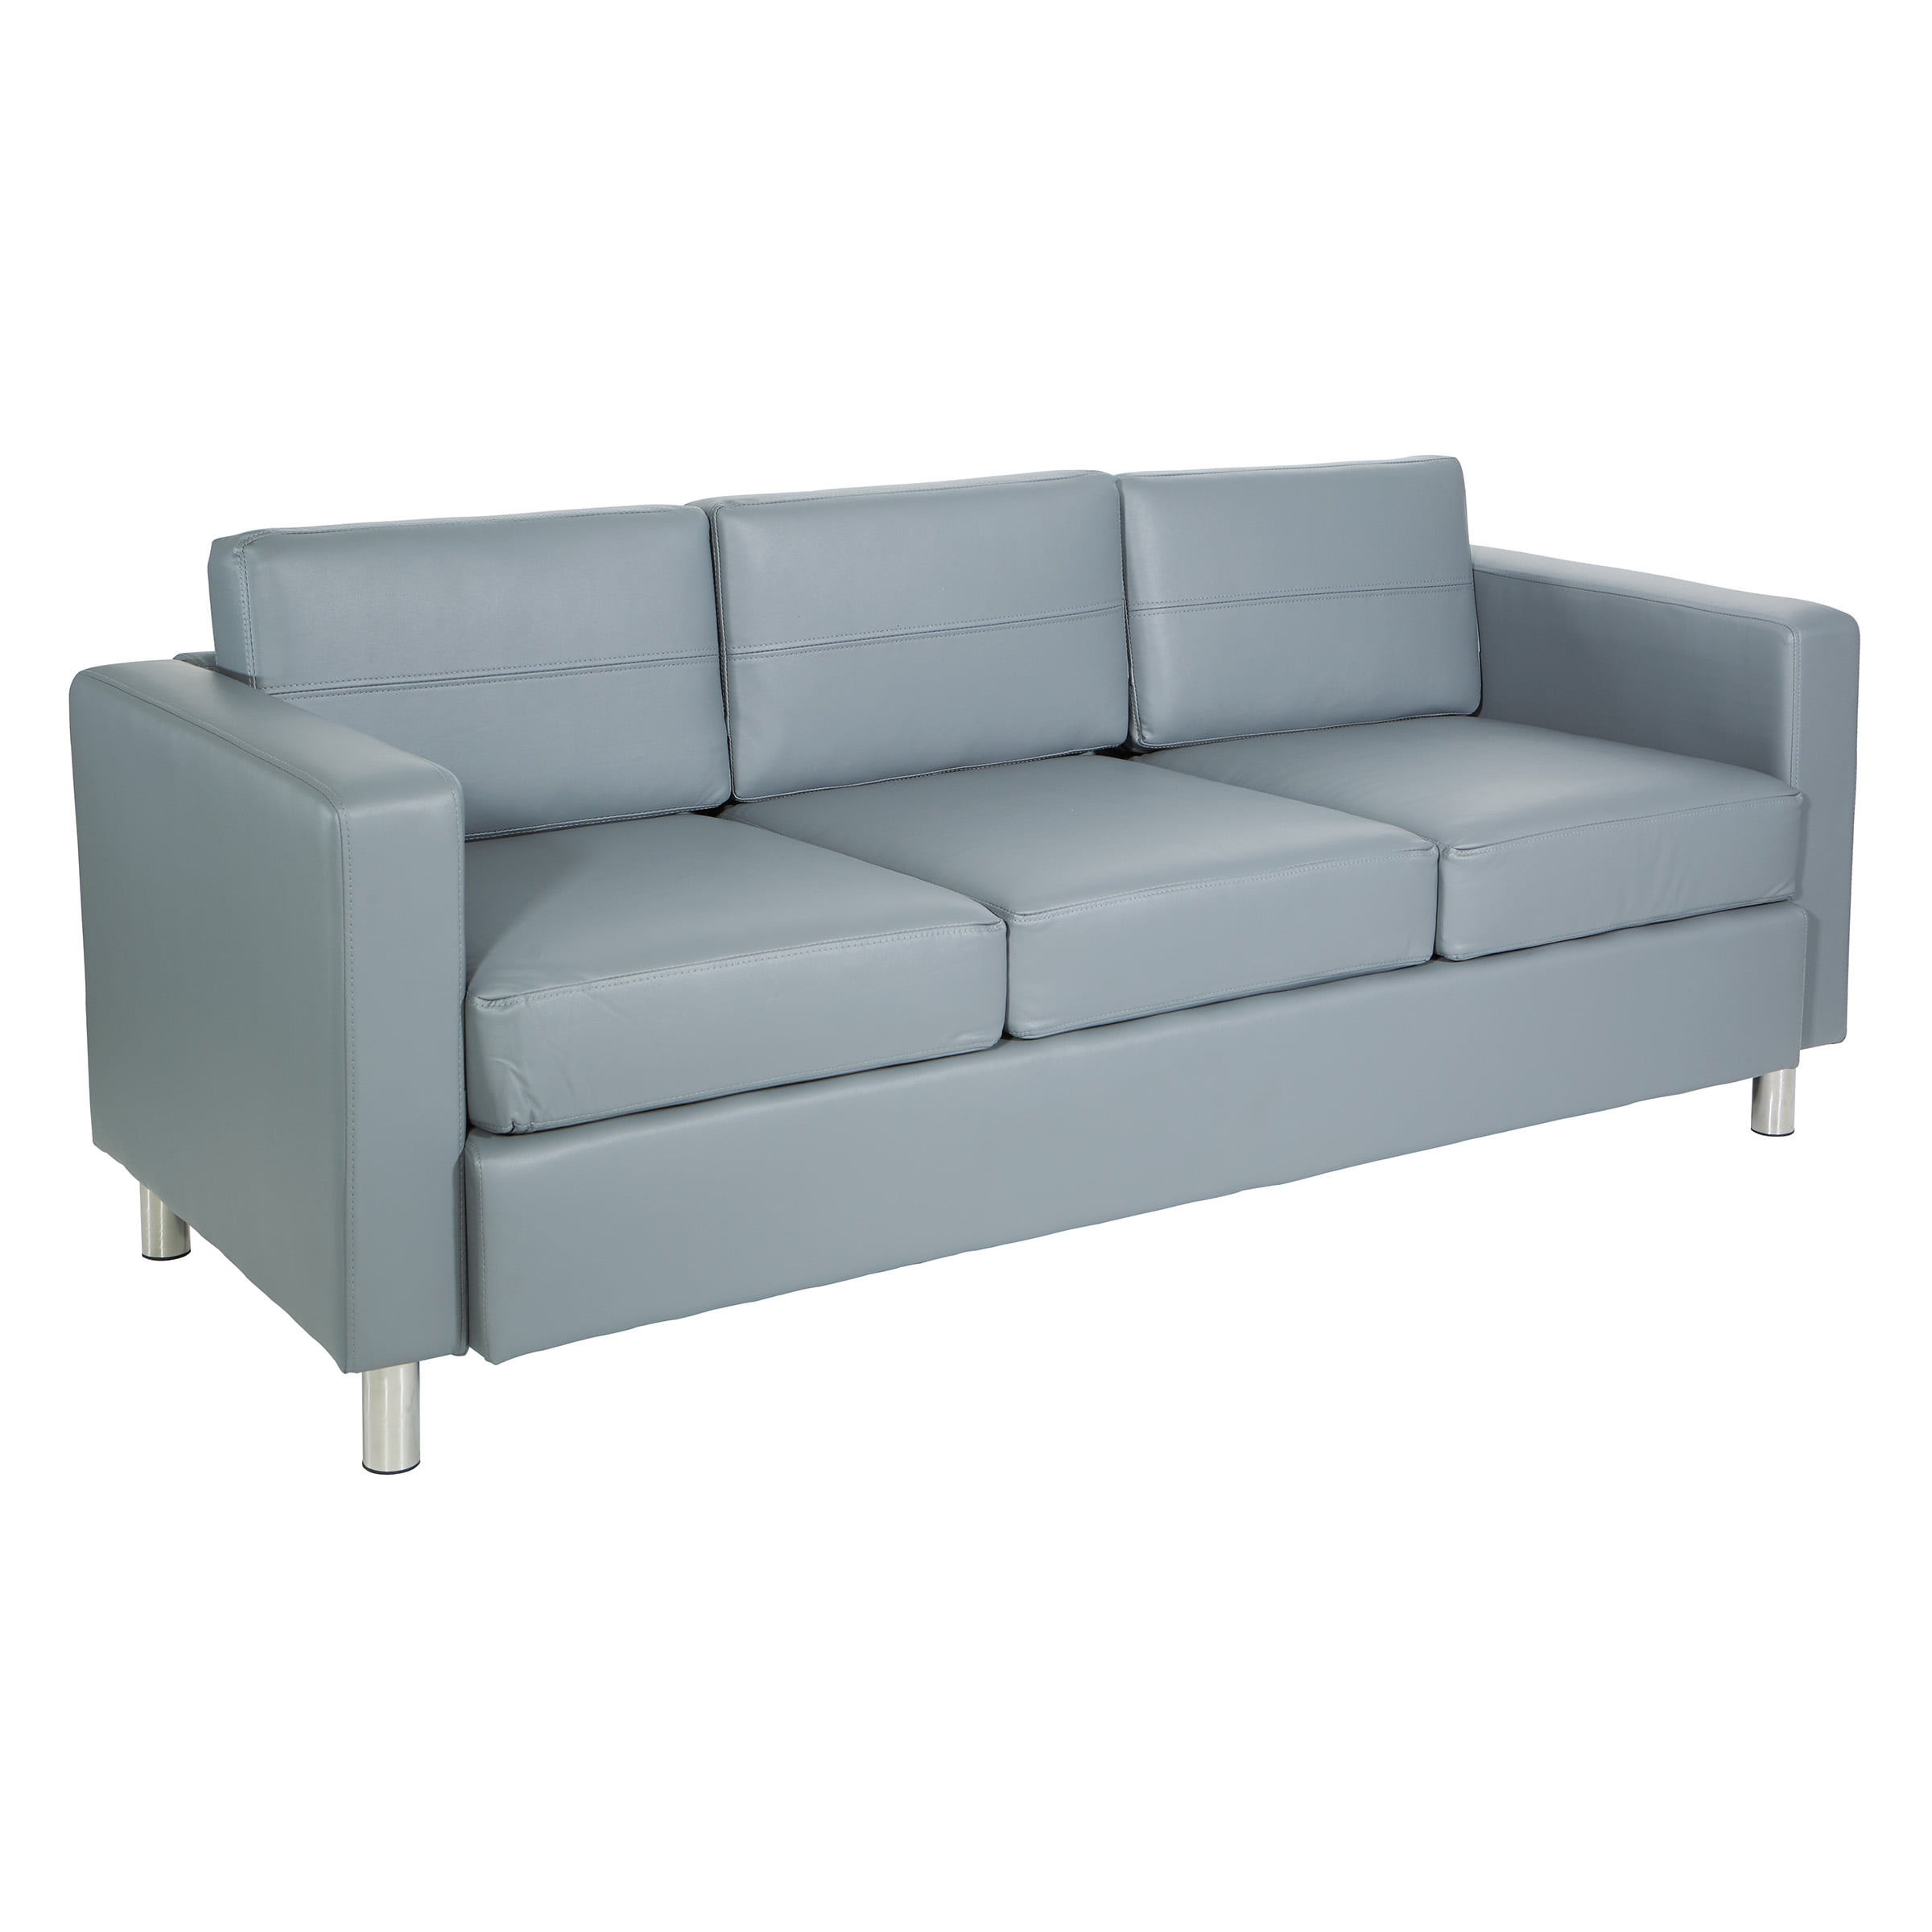 Seats Home in with OSP Charcoal and Pacific Legs Color Sofa Furnishings Couch Silver Faux Box Grey Leather Spring